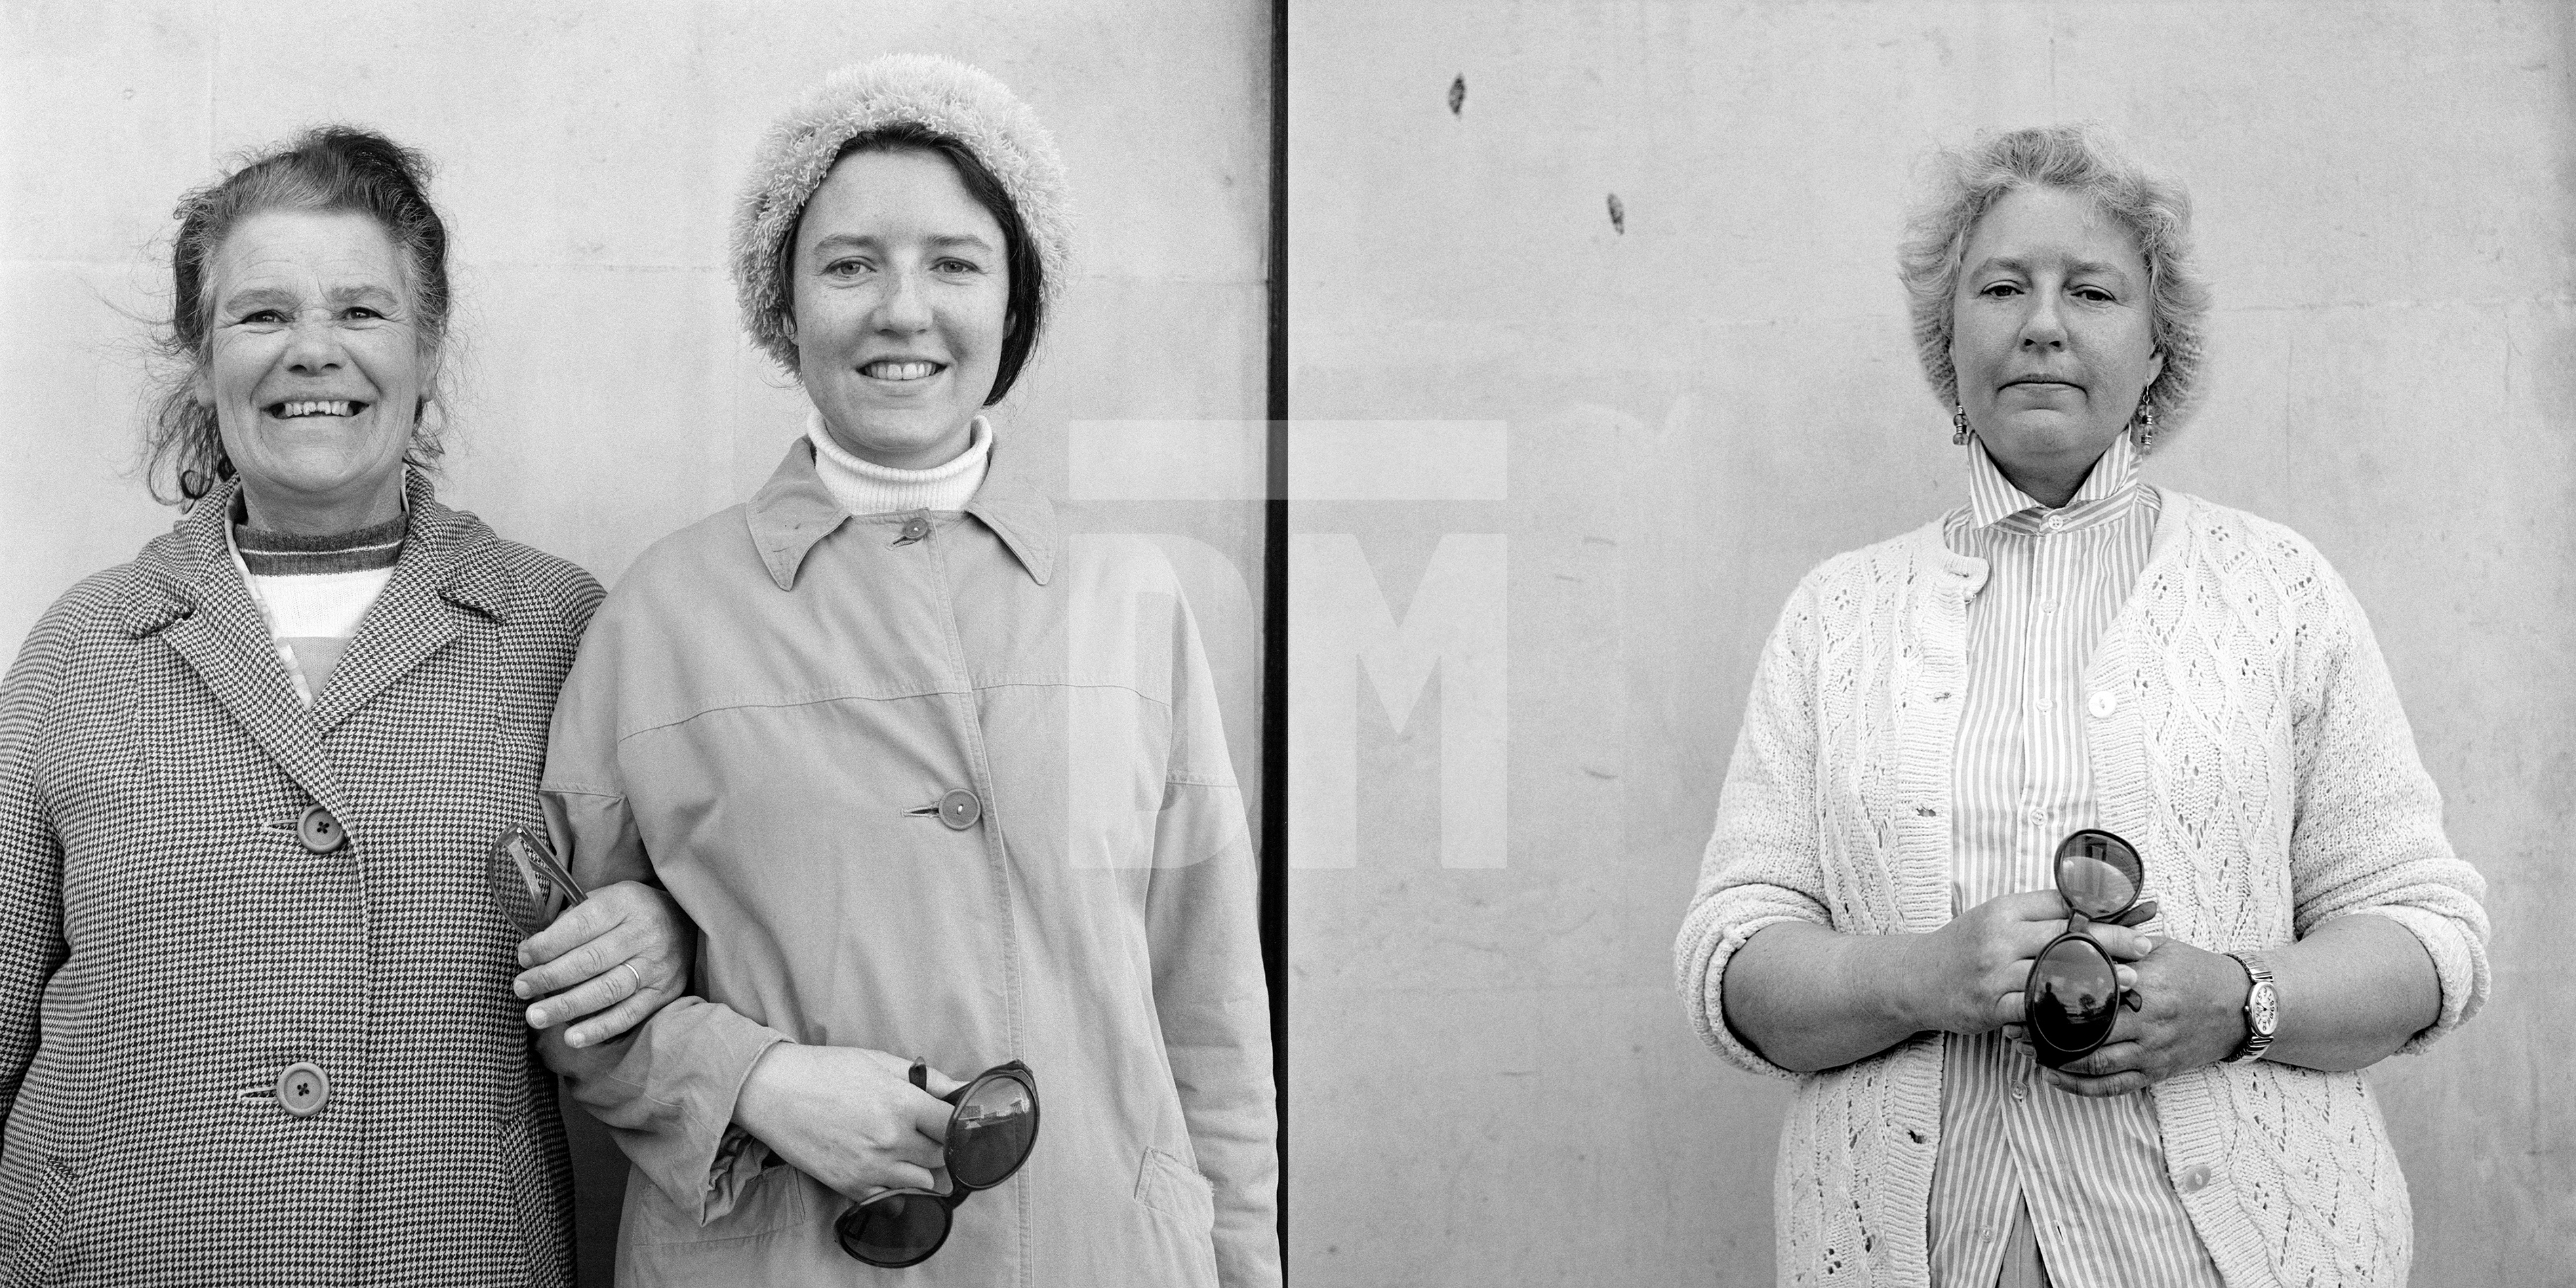 Mother and daughter: left May Gower, right Melody “Molly” Gower. Southampton. 1974 and 1997 by Daniel Meadows